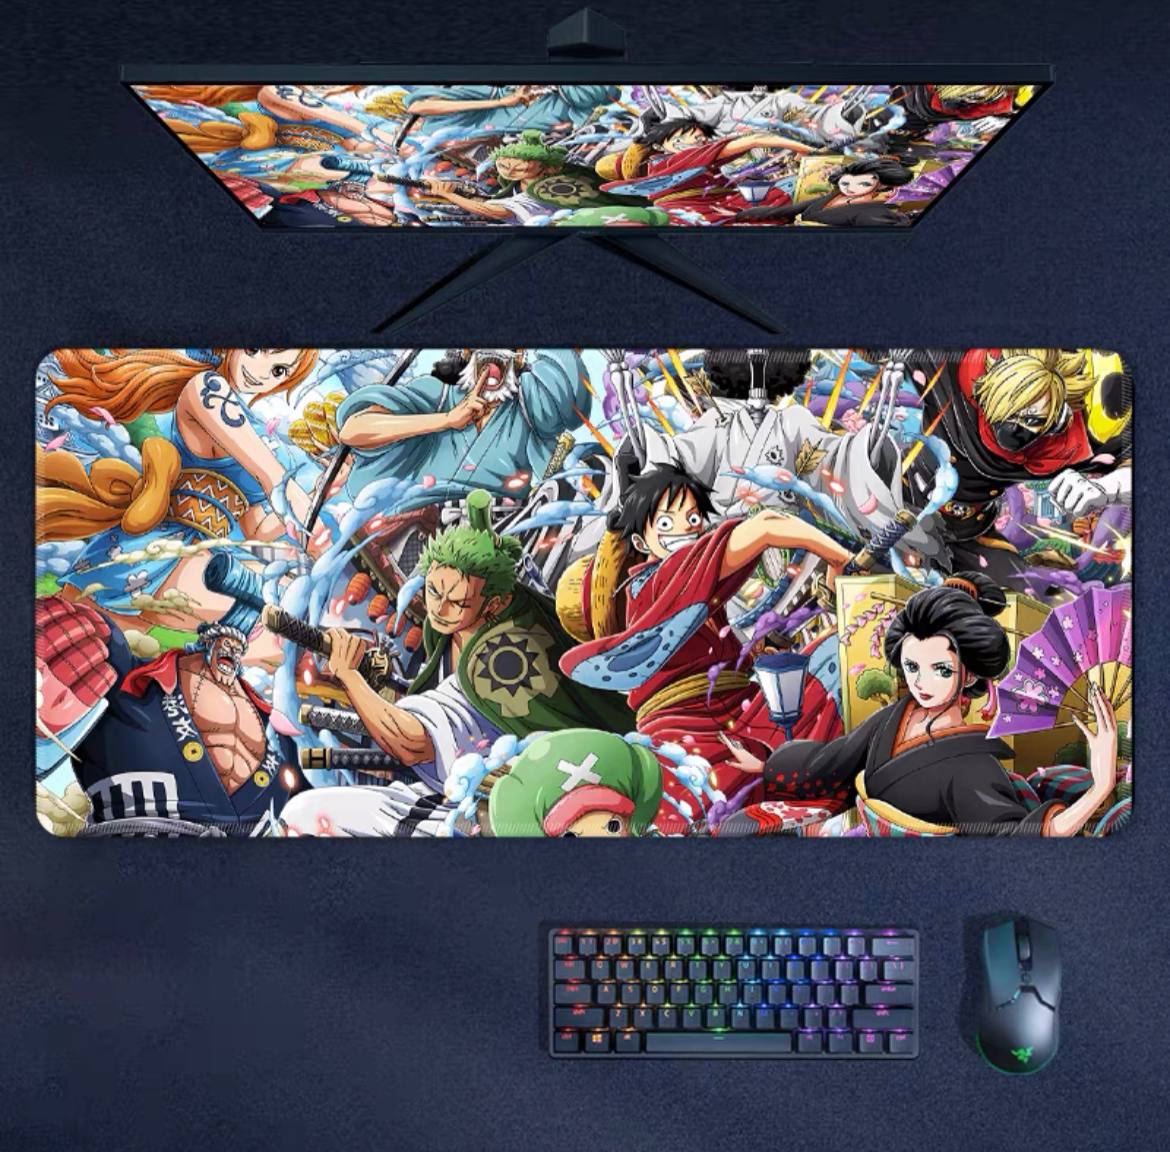 One piece mouse pad -  France